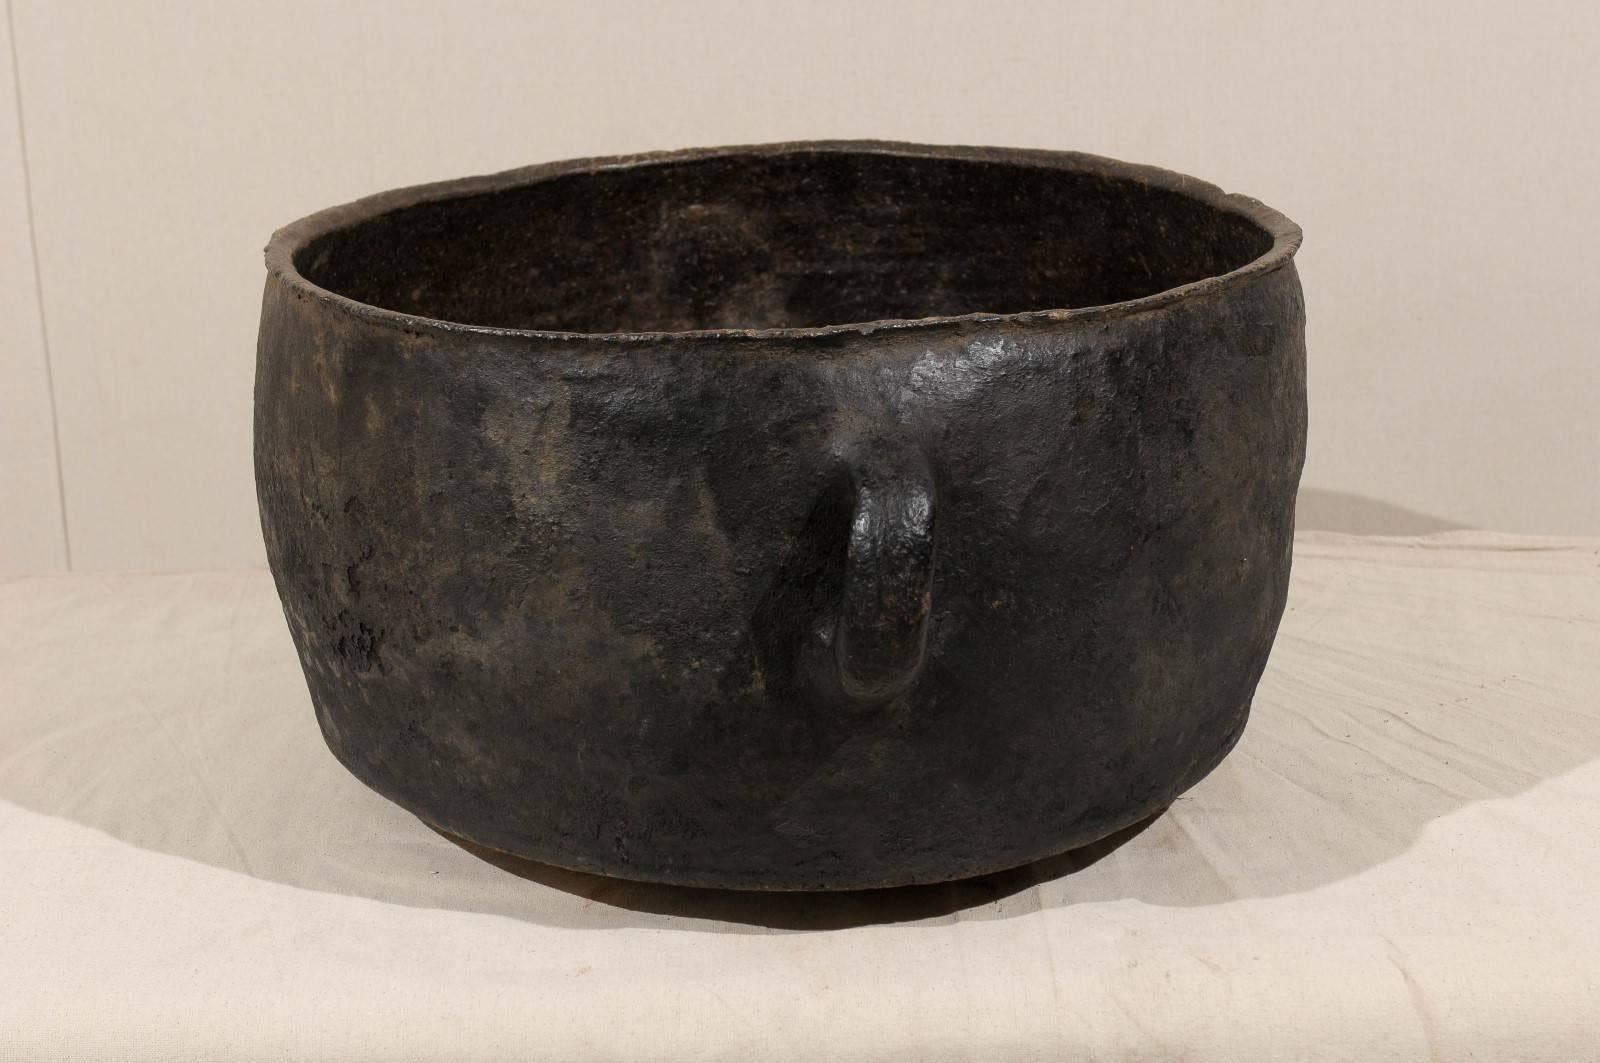 Clay Spanish Colonial Pot from the Mid-19th Century, Black Color